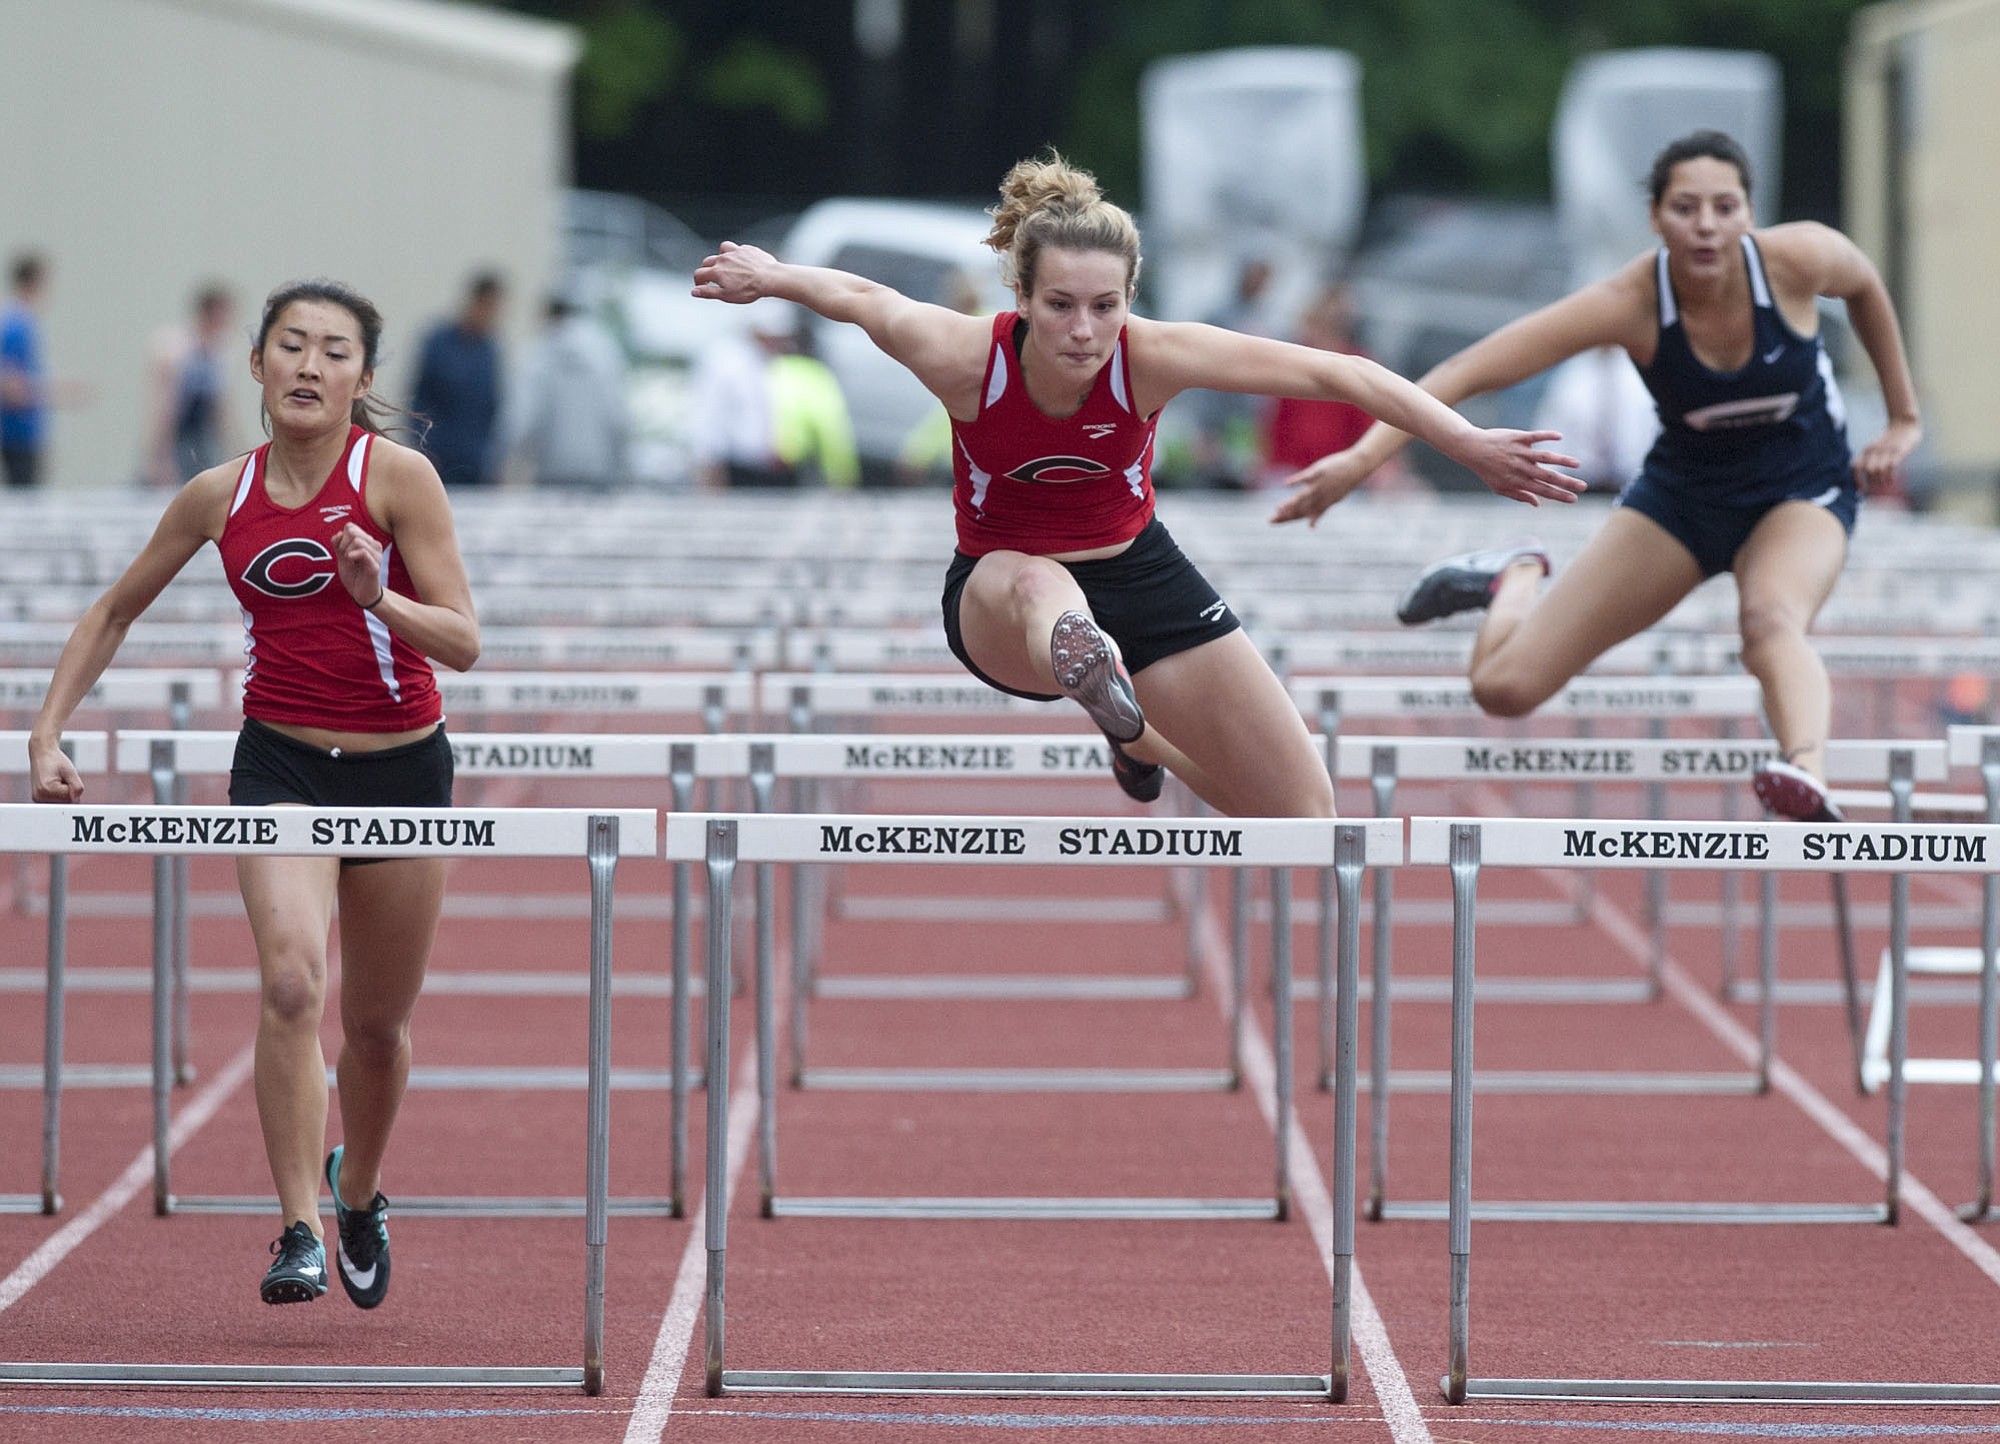 Camas High School's Jordan Davis clears a hurdle in the women's 100m Hurdles as she competes at the 4A GSHL District track meet at McKenzie Stadium in Vancouver Tuesday May 19, 2015.